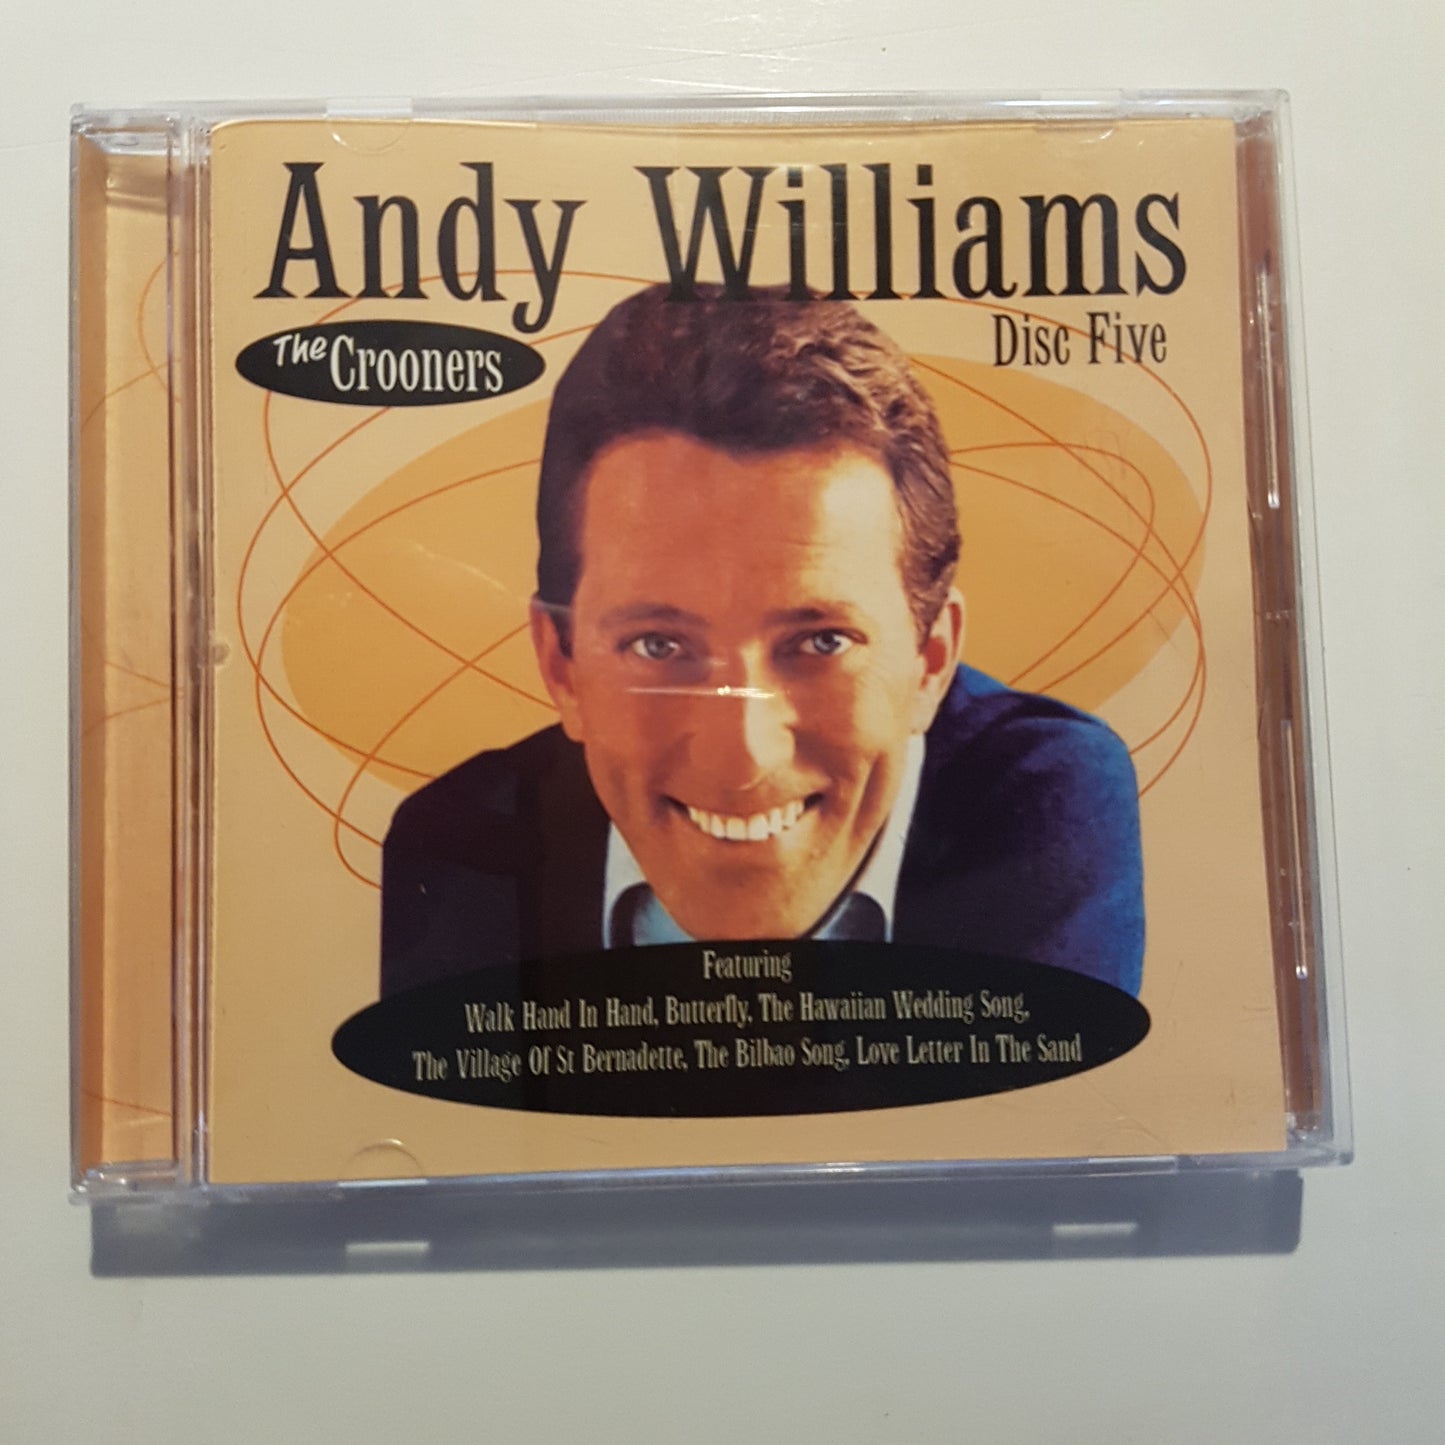 Andy Williams, The Crooners Disc 5 (1CD)